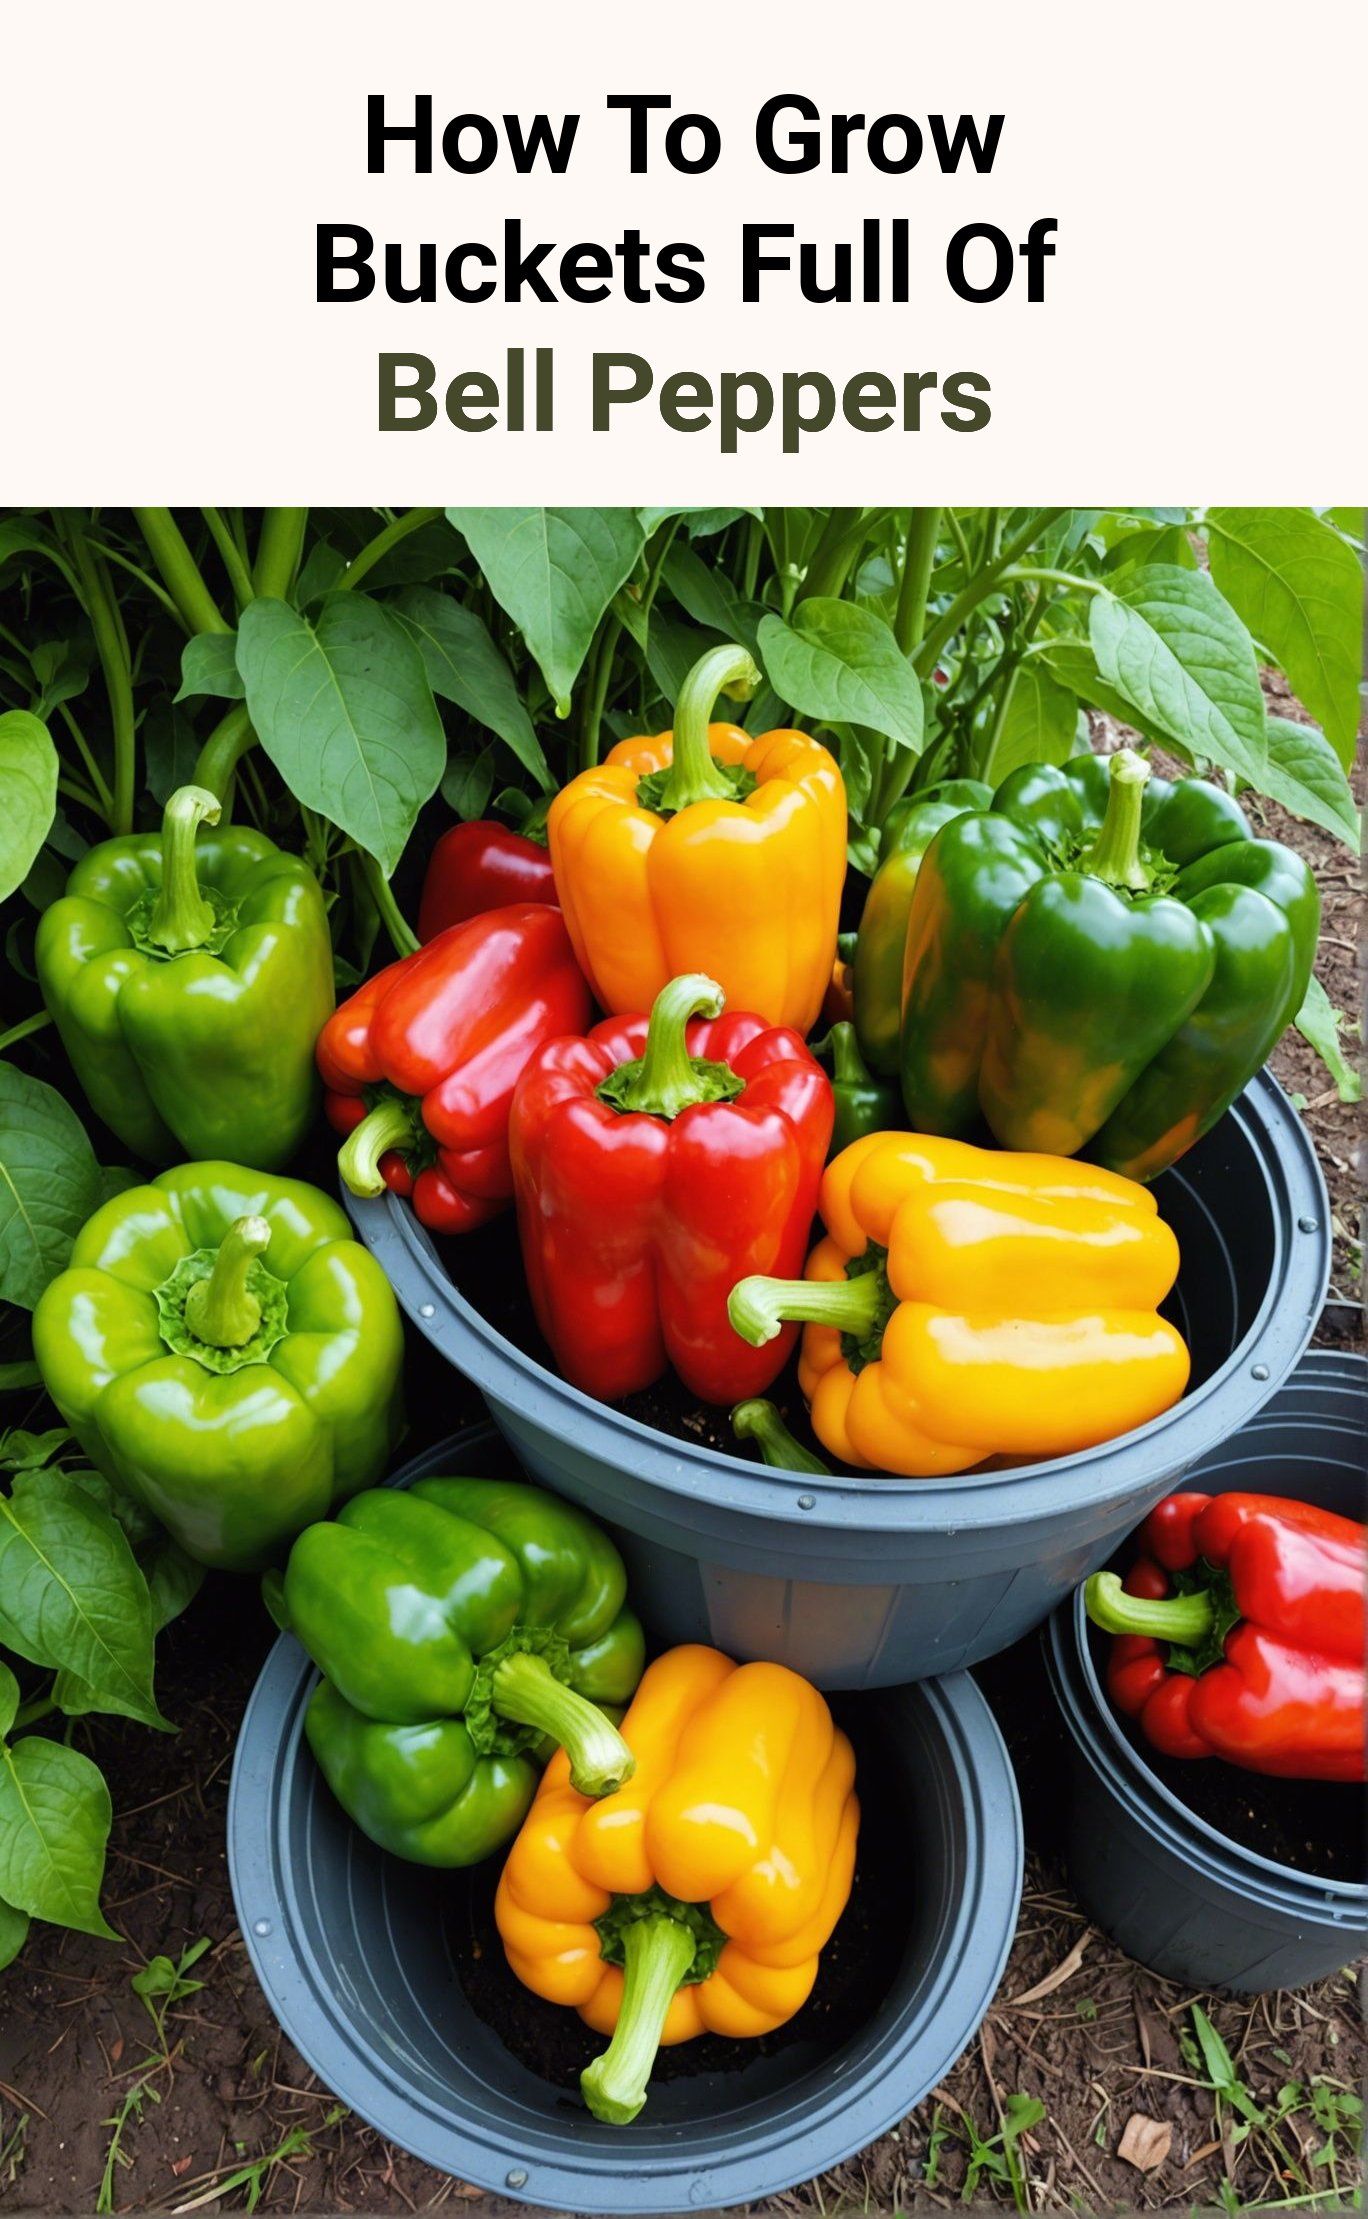 How To Grow Buckets Full Of Bell Peppers